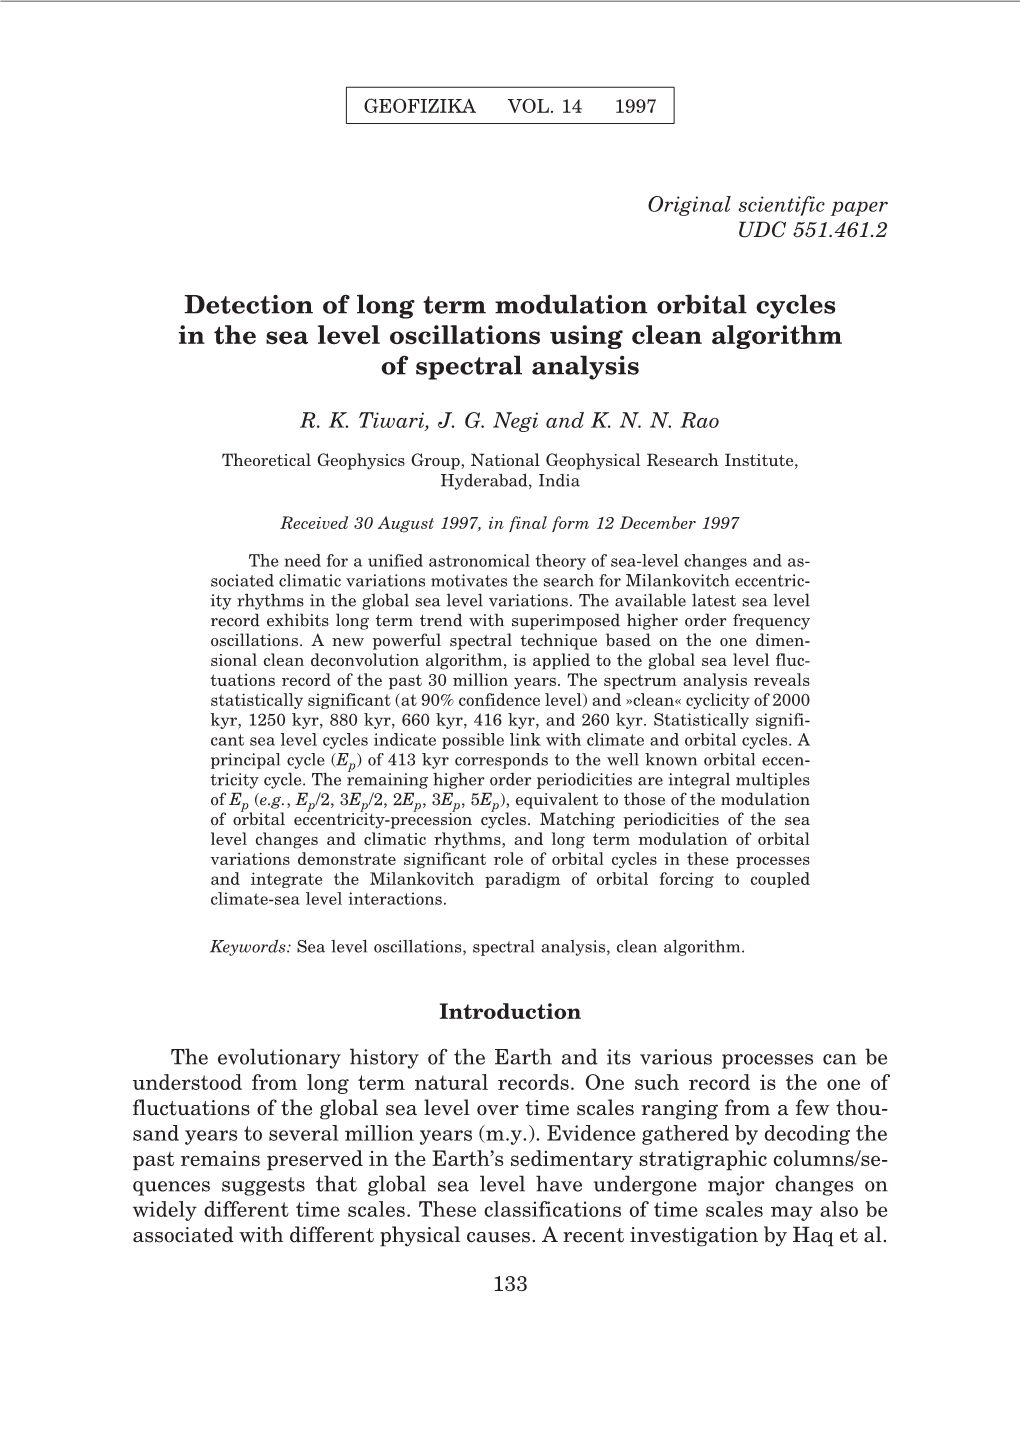 Detection of Long Term Modulation Orbital Cycles in the Sea Level Oscillations Using Clean Algorithm of Spectral Analysis